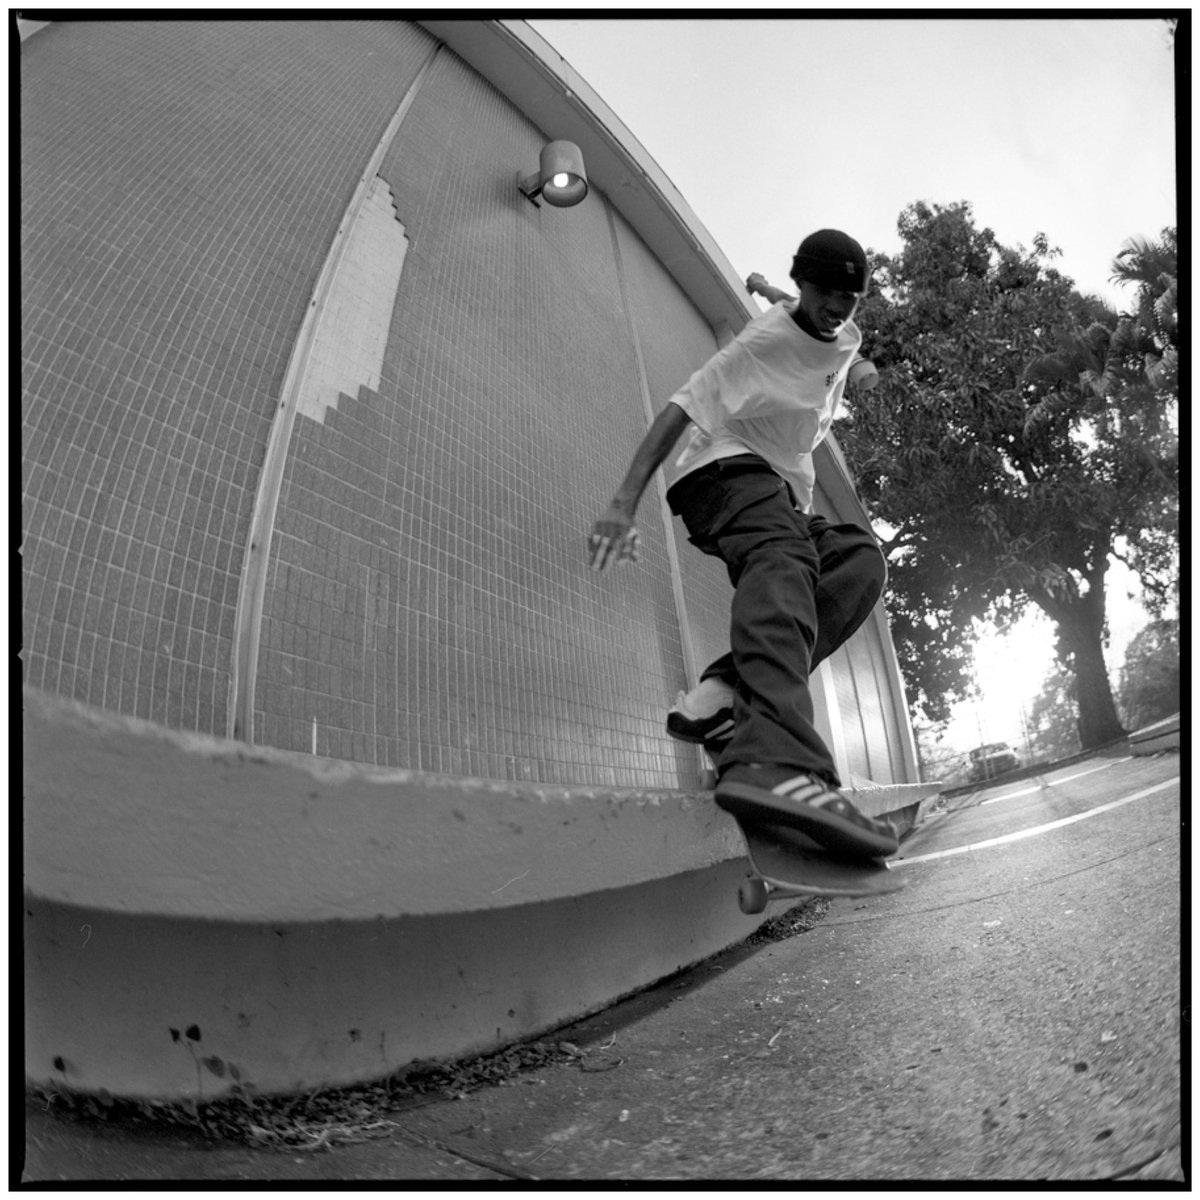 Anthony Forbes, Back Smith.
#hasselblad